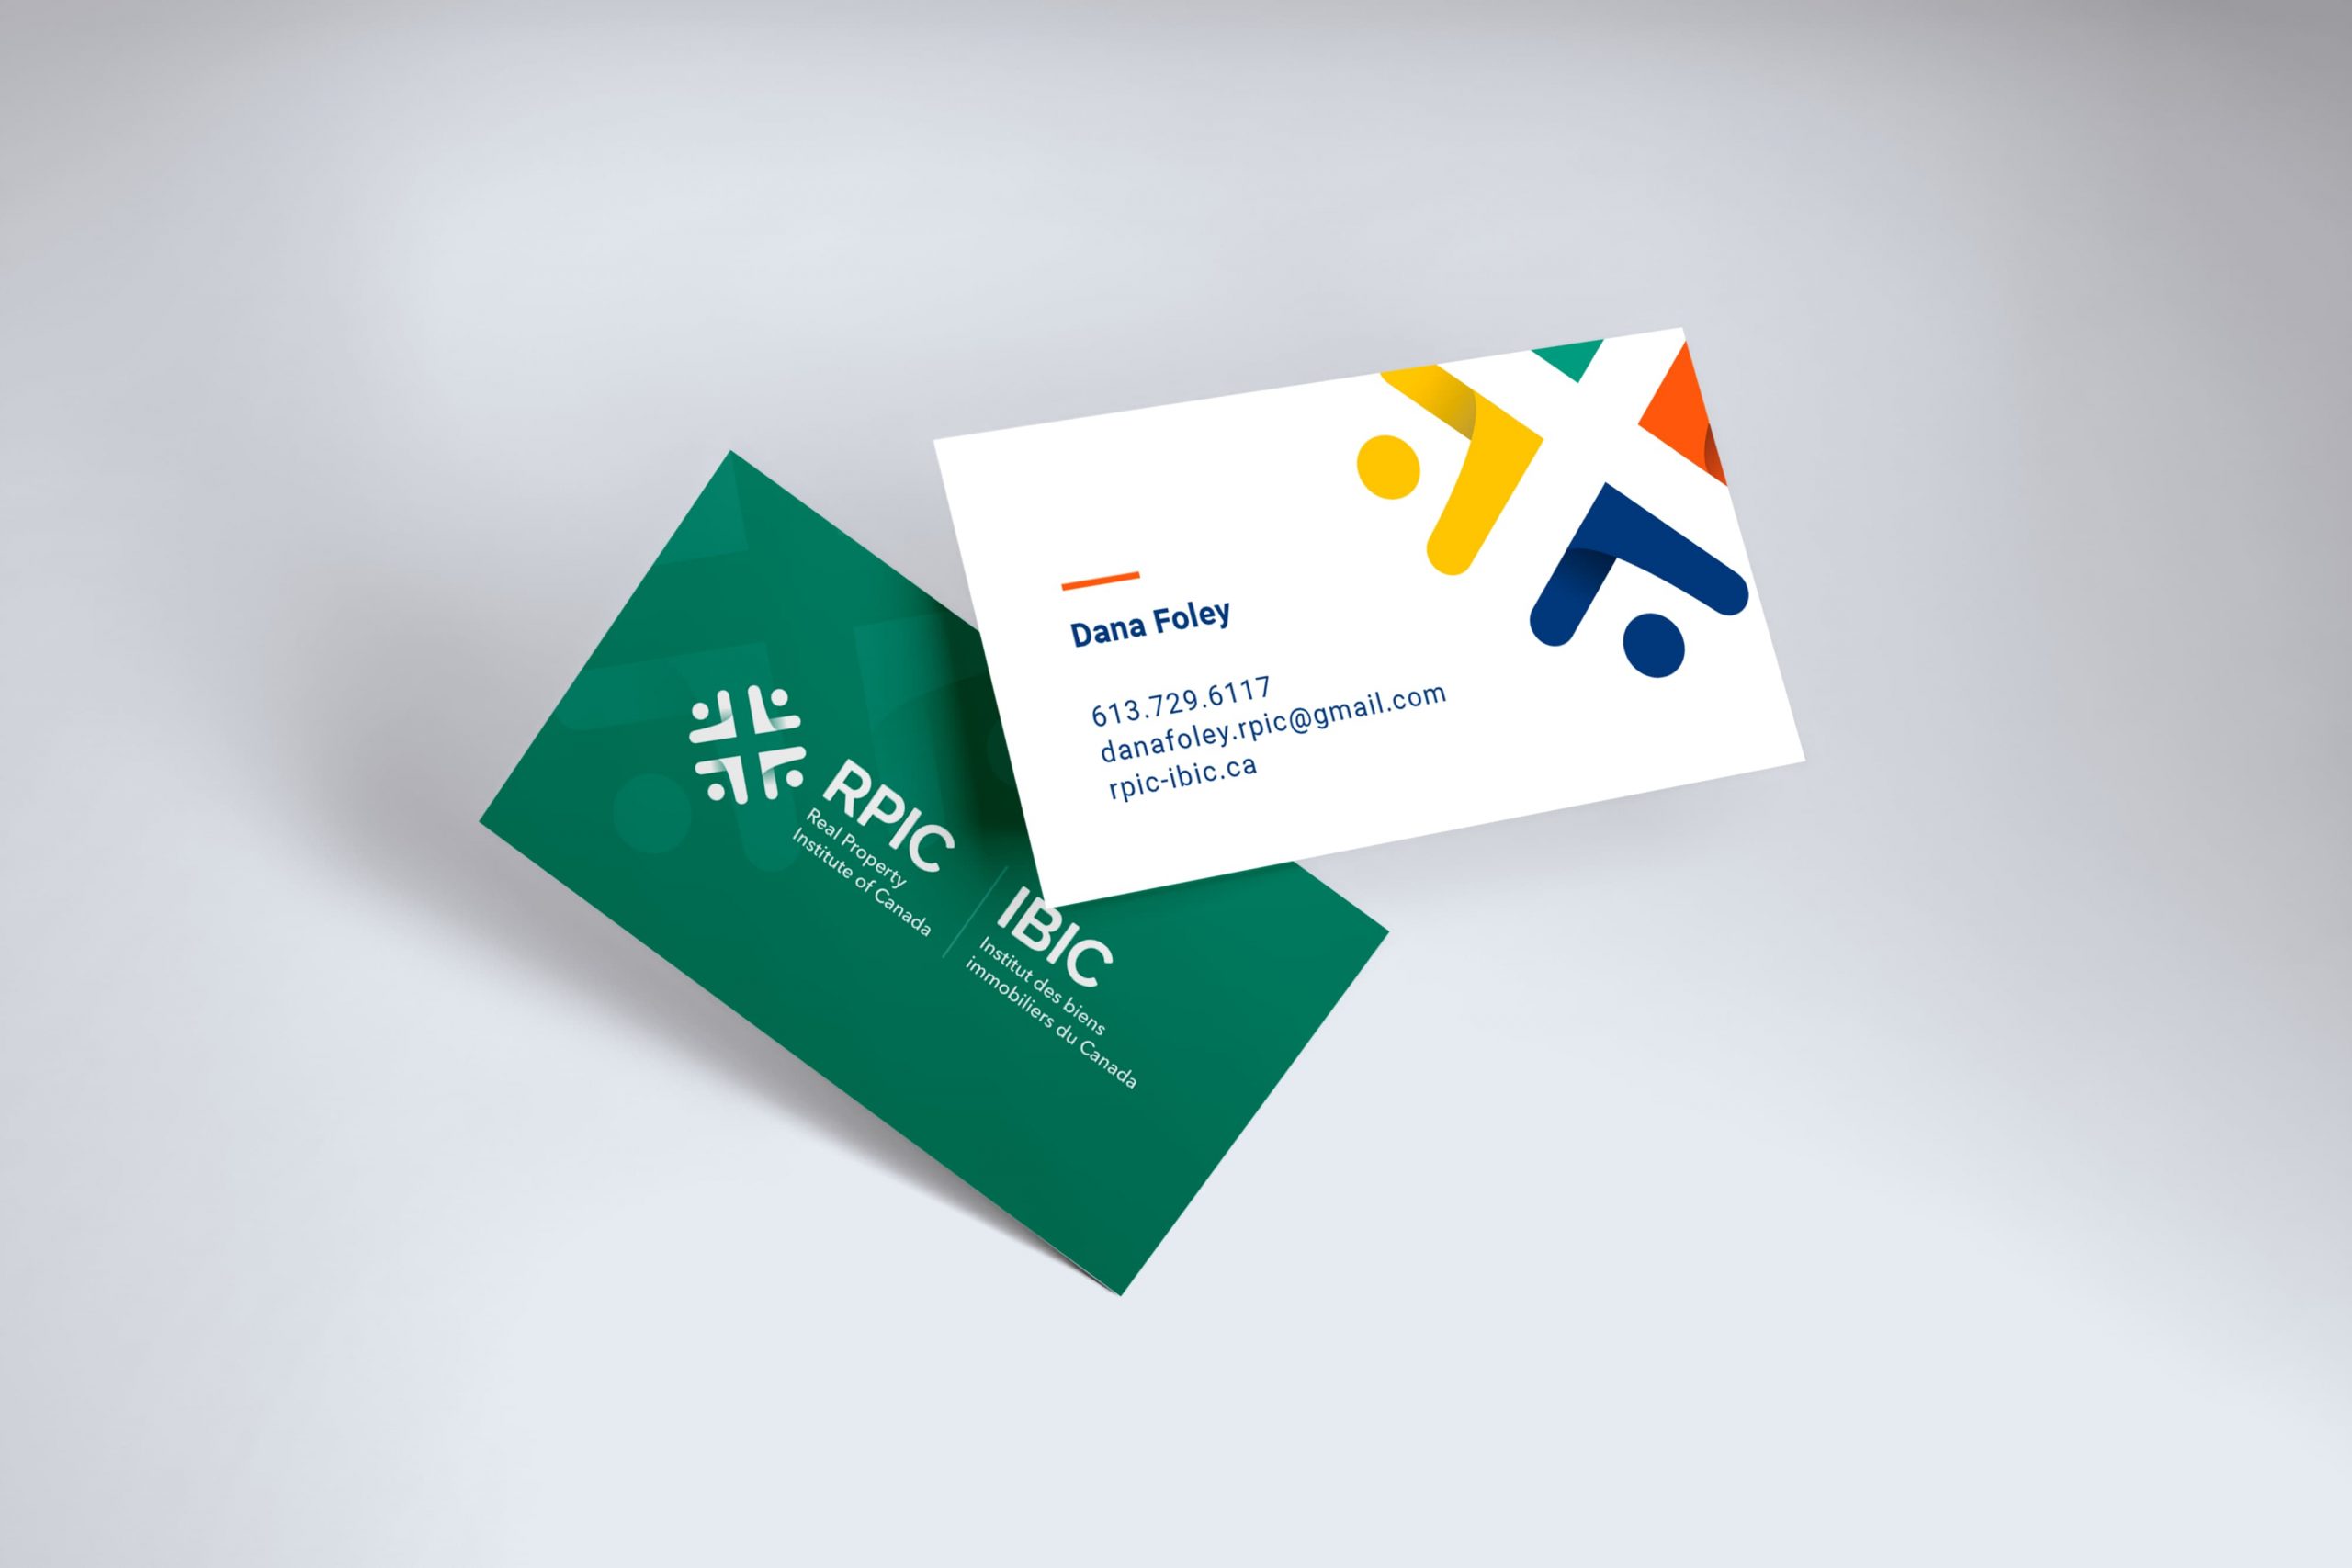 RPIC branded business cards